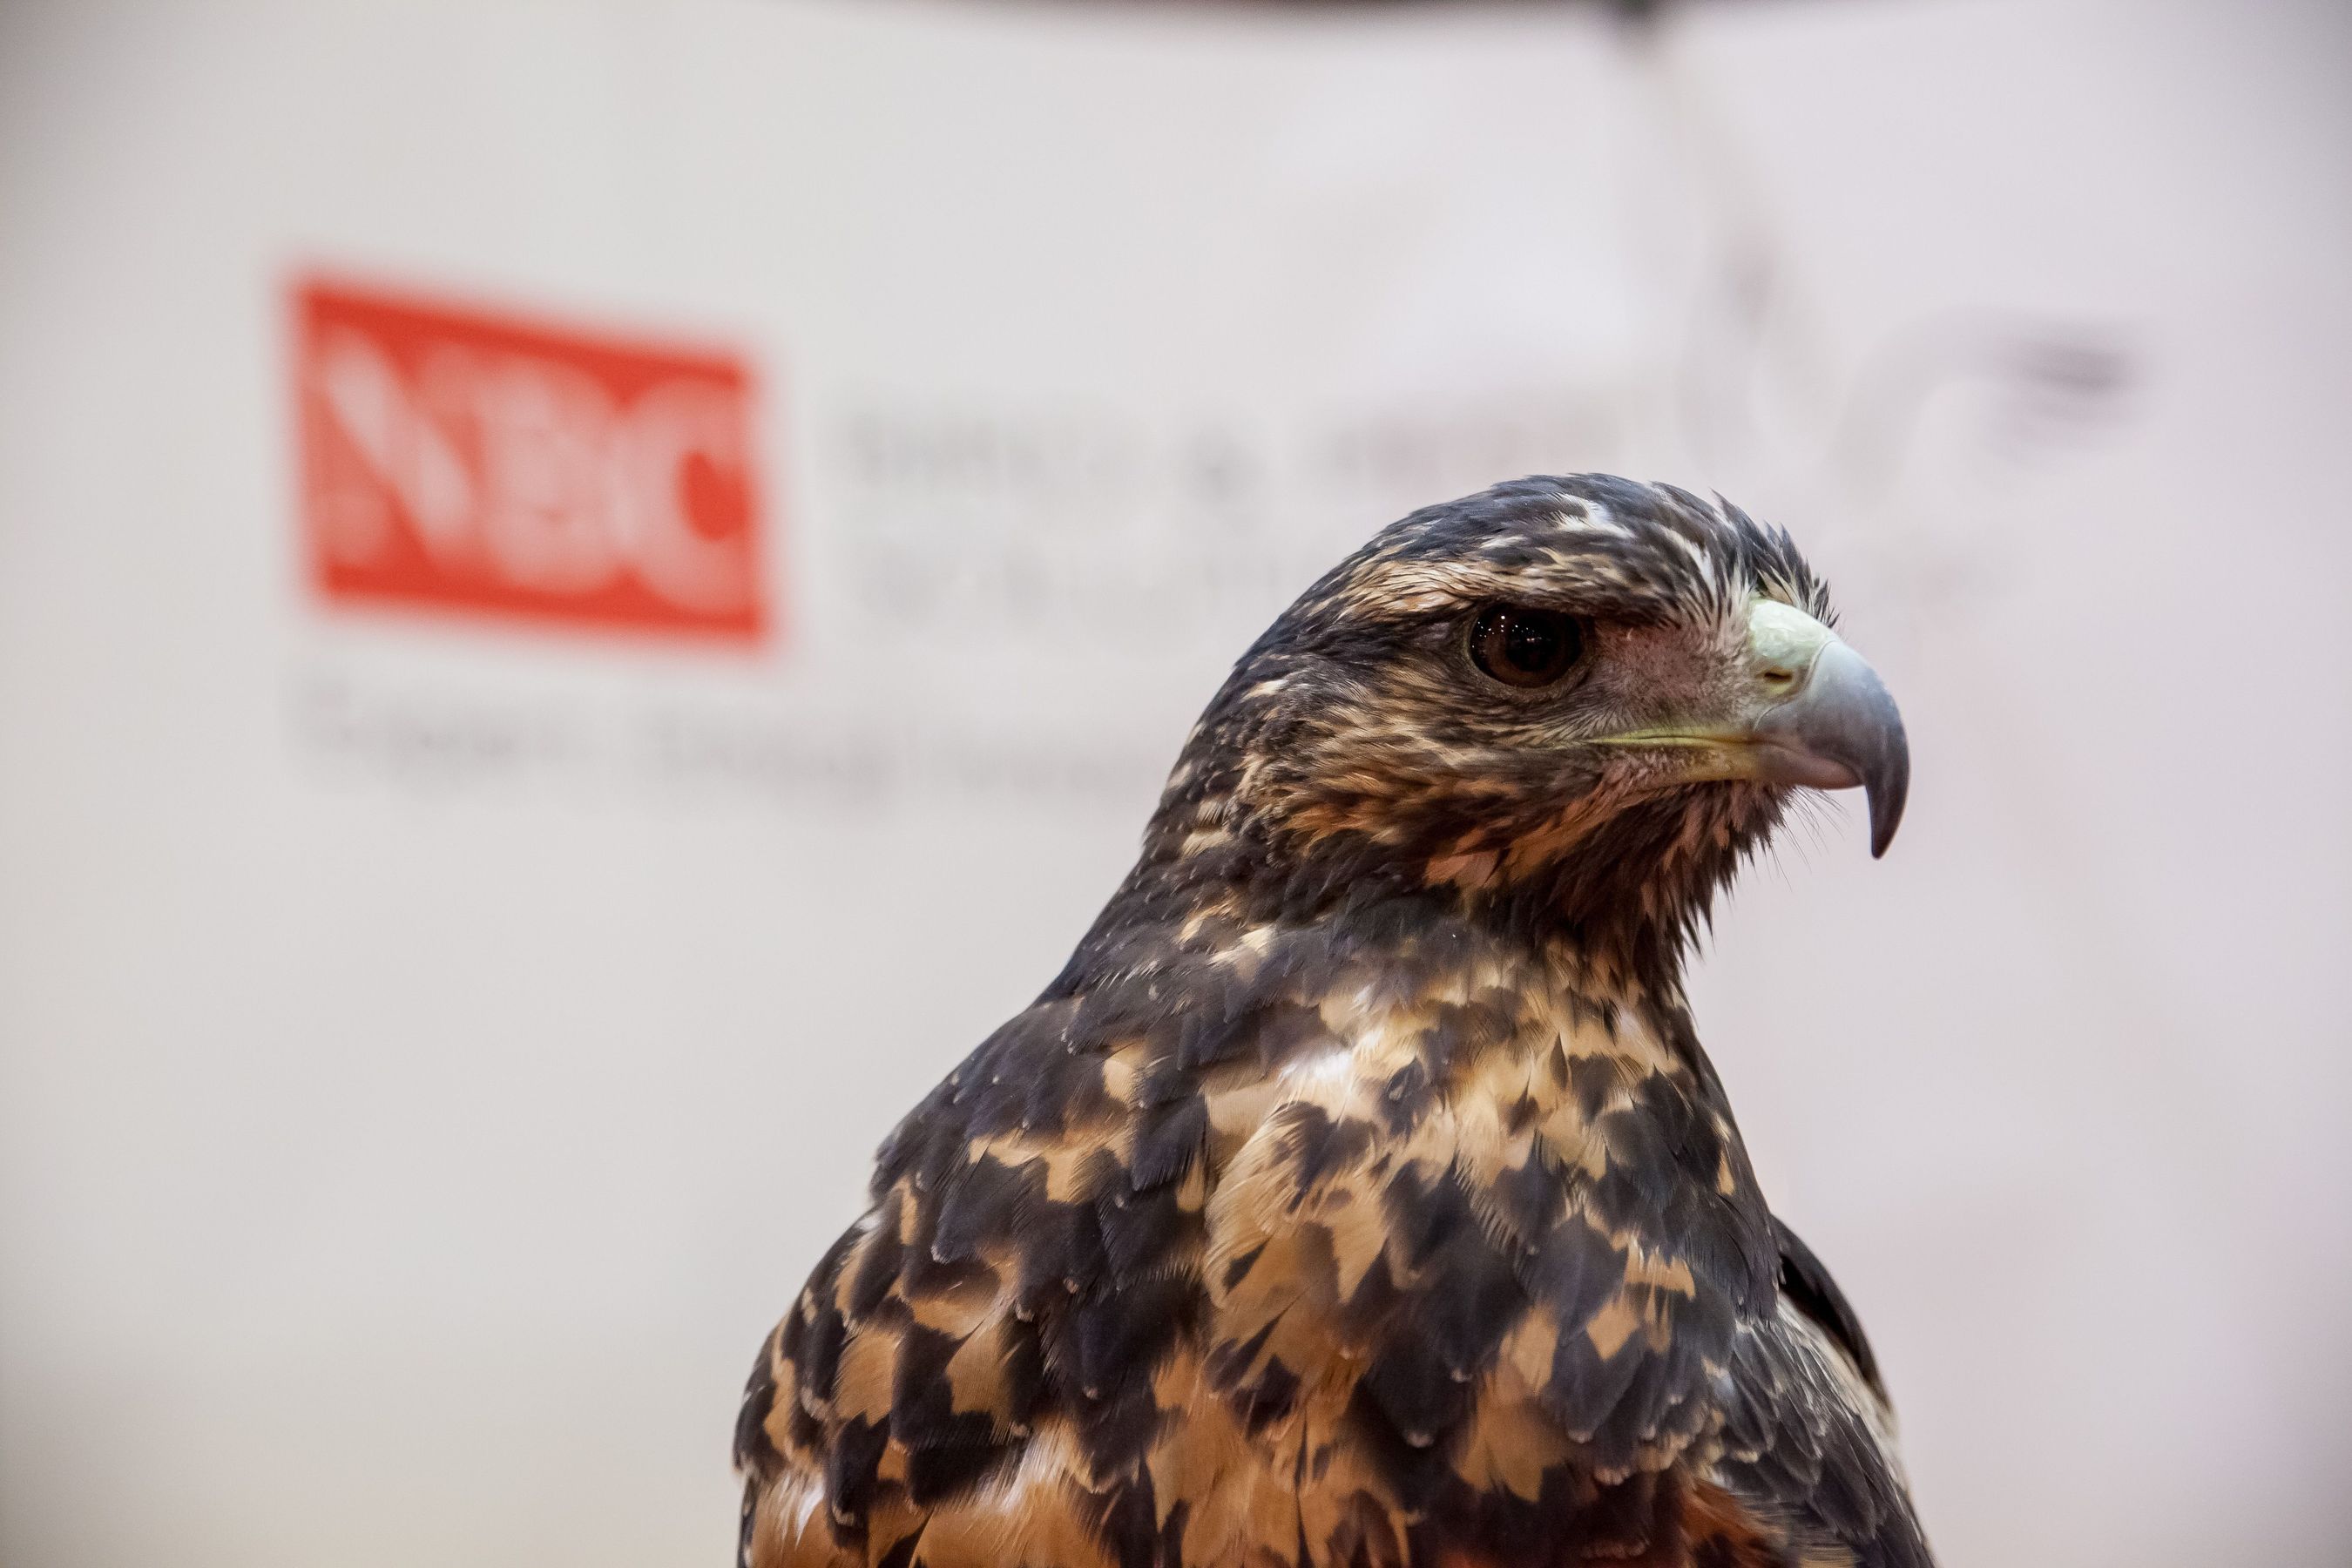 10,000 attendees and 1 falcon at Facilities Show 2014 (PRNewsFoto/UBM Live)